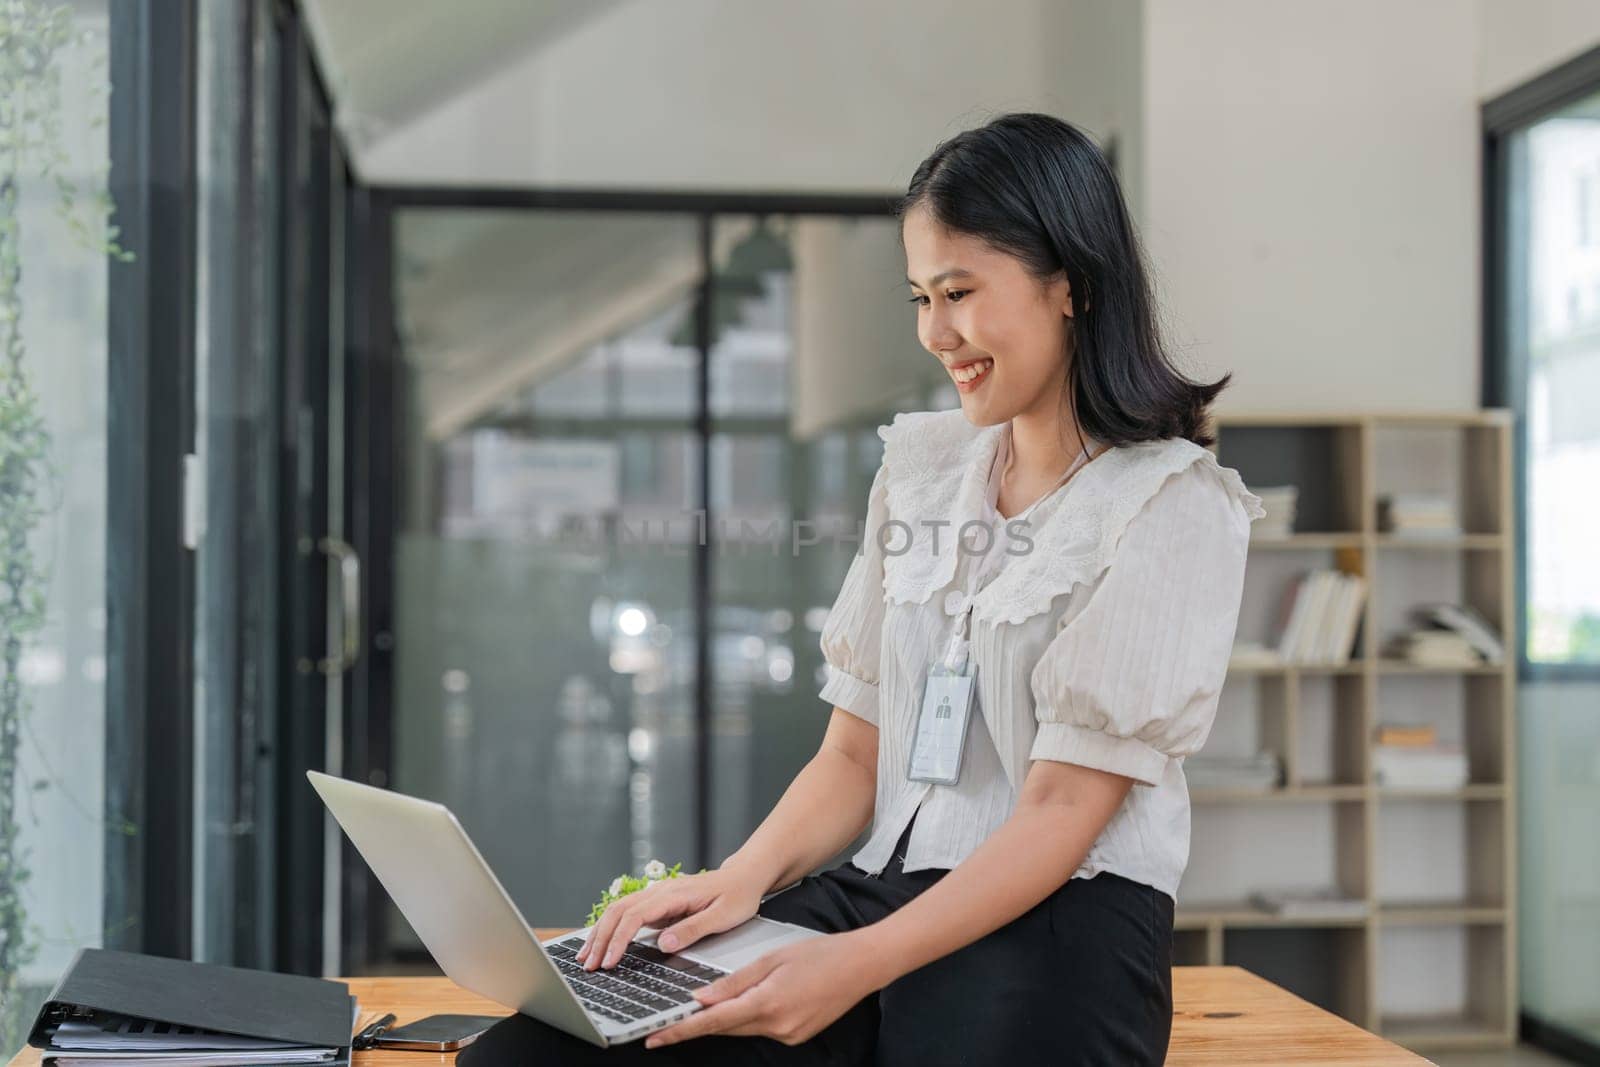 Portrait of a charming young woman businessman in the office siting holding a laptop n looking at the laptop.